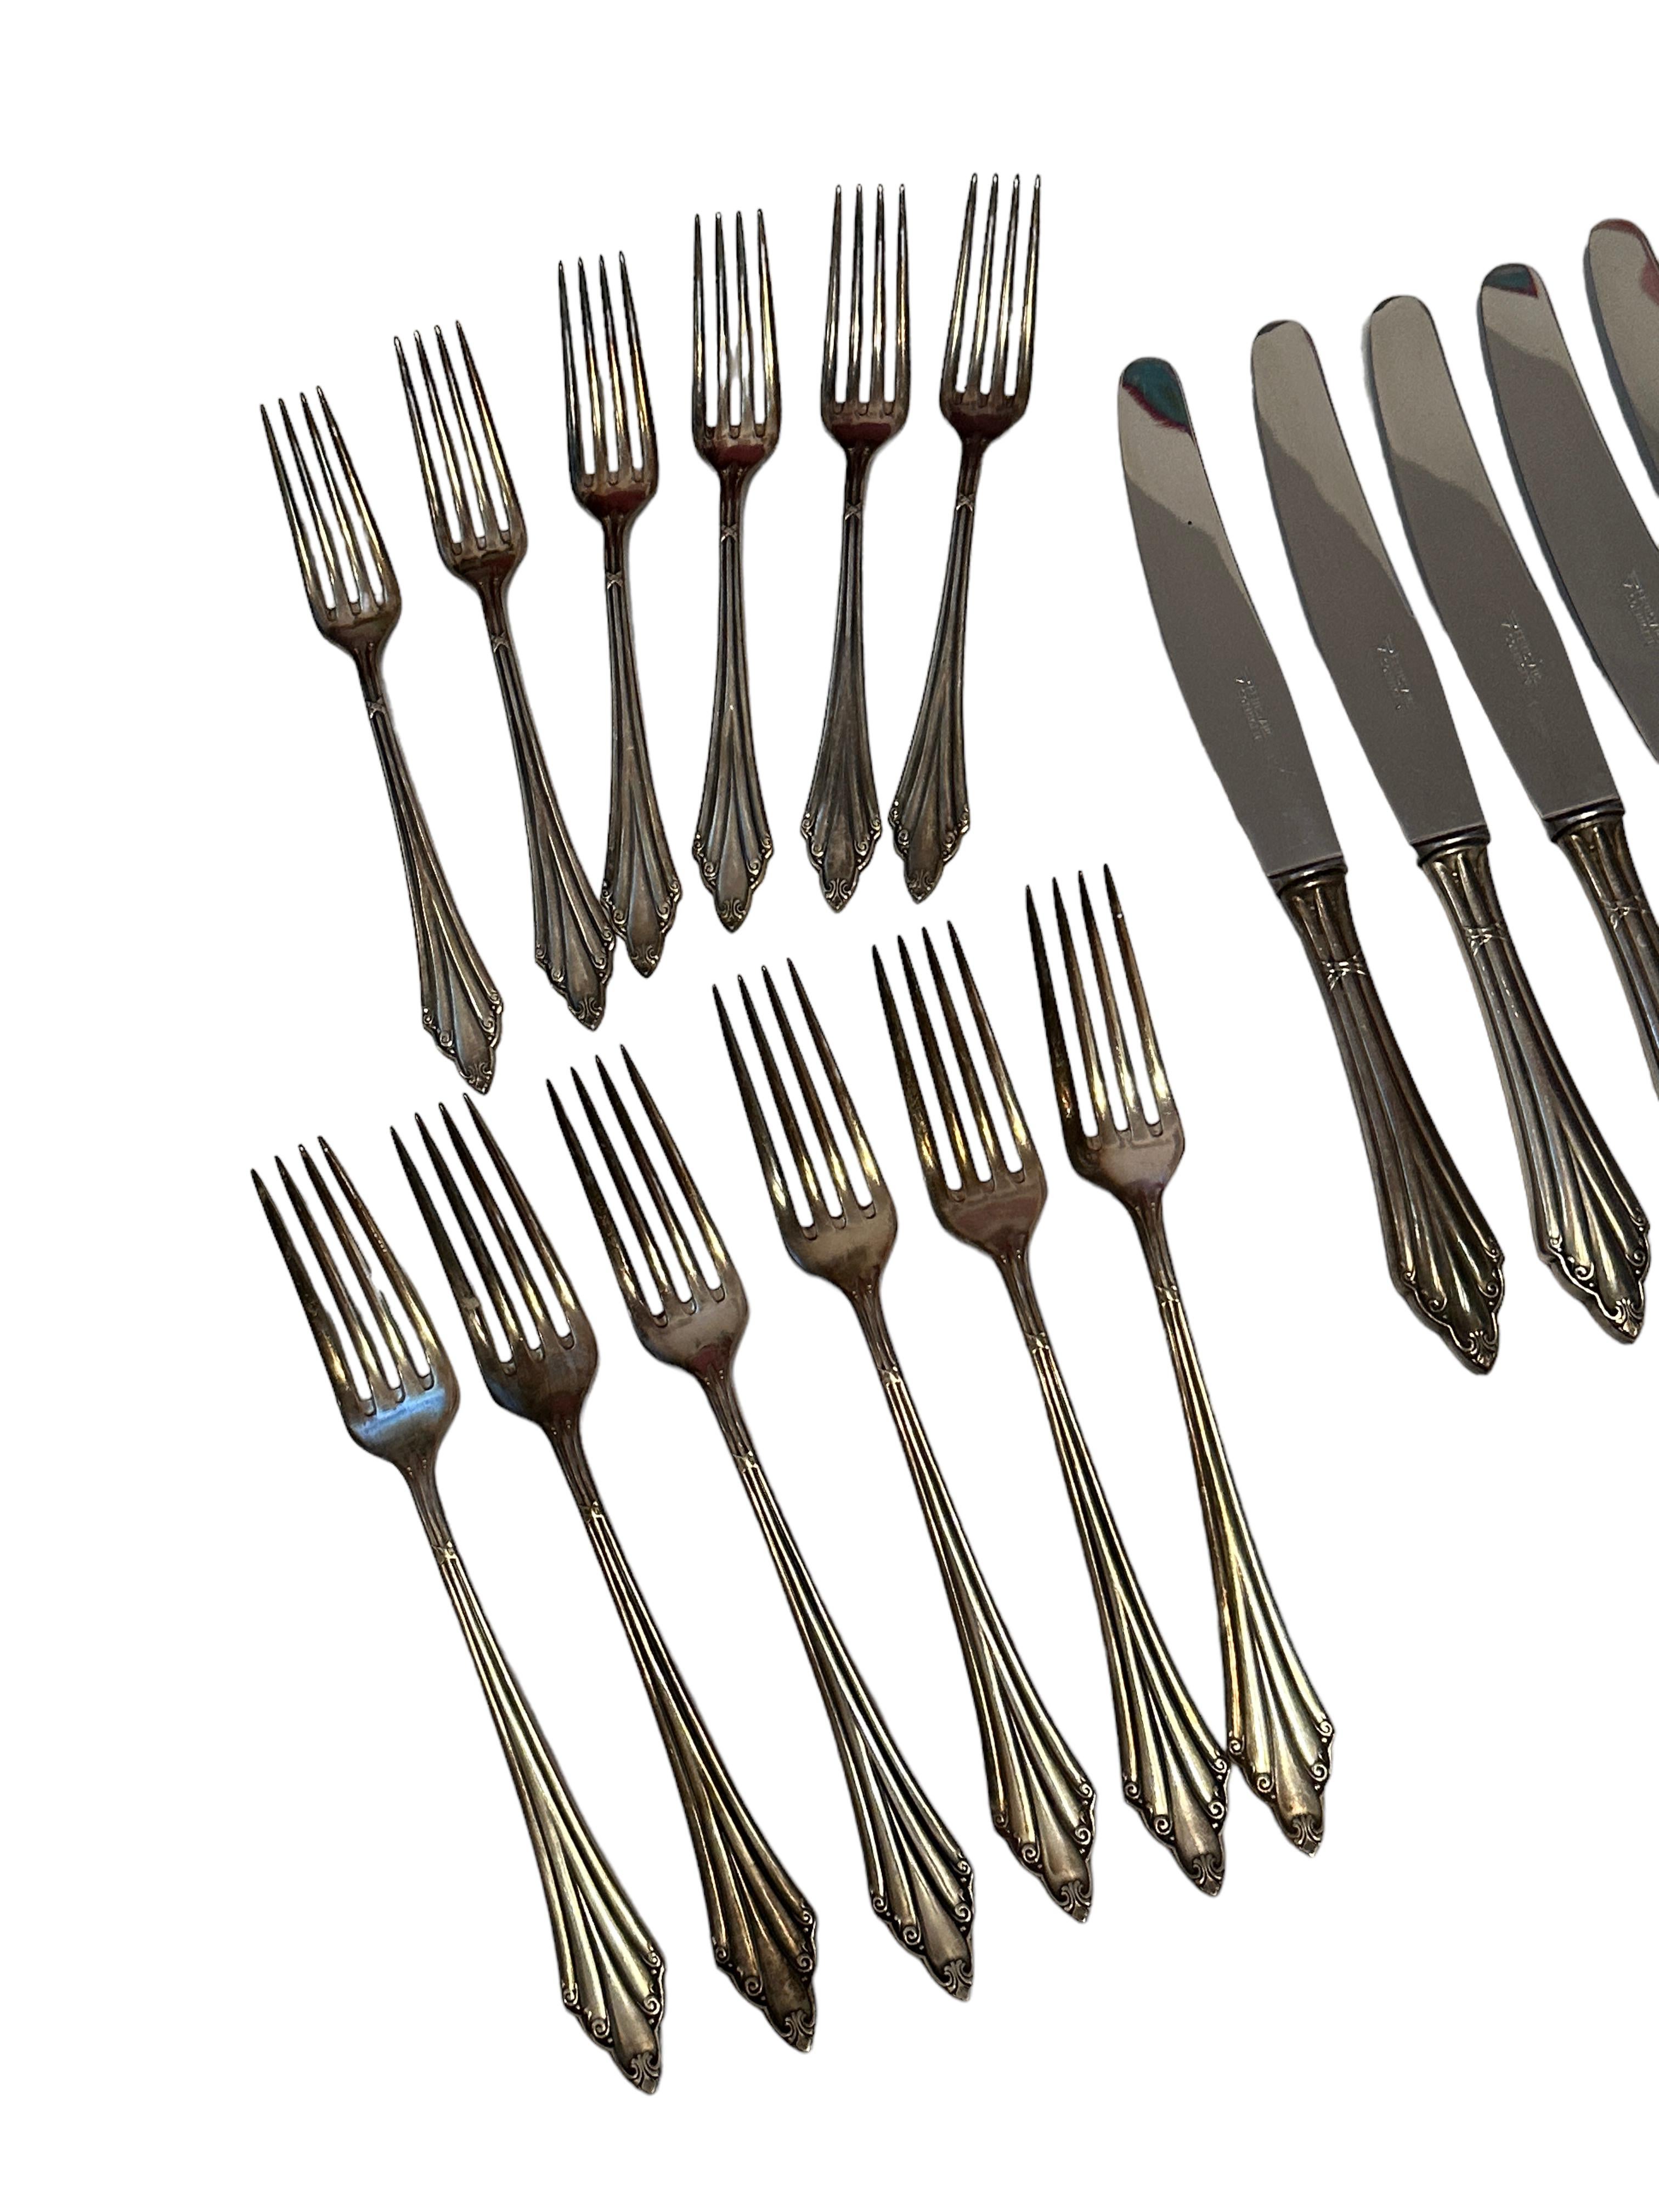 A beautiful Art Nouveau flatware set of 12 cake forks, 6 Coffee Spoons, 6 Soup spoon, 6 large knife and 6 smaller ones. also 6 large forks and 6 smaller ones. A total of 48 pieces, made by WMF in the Fan design. Made of silver plate metal, it will